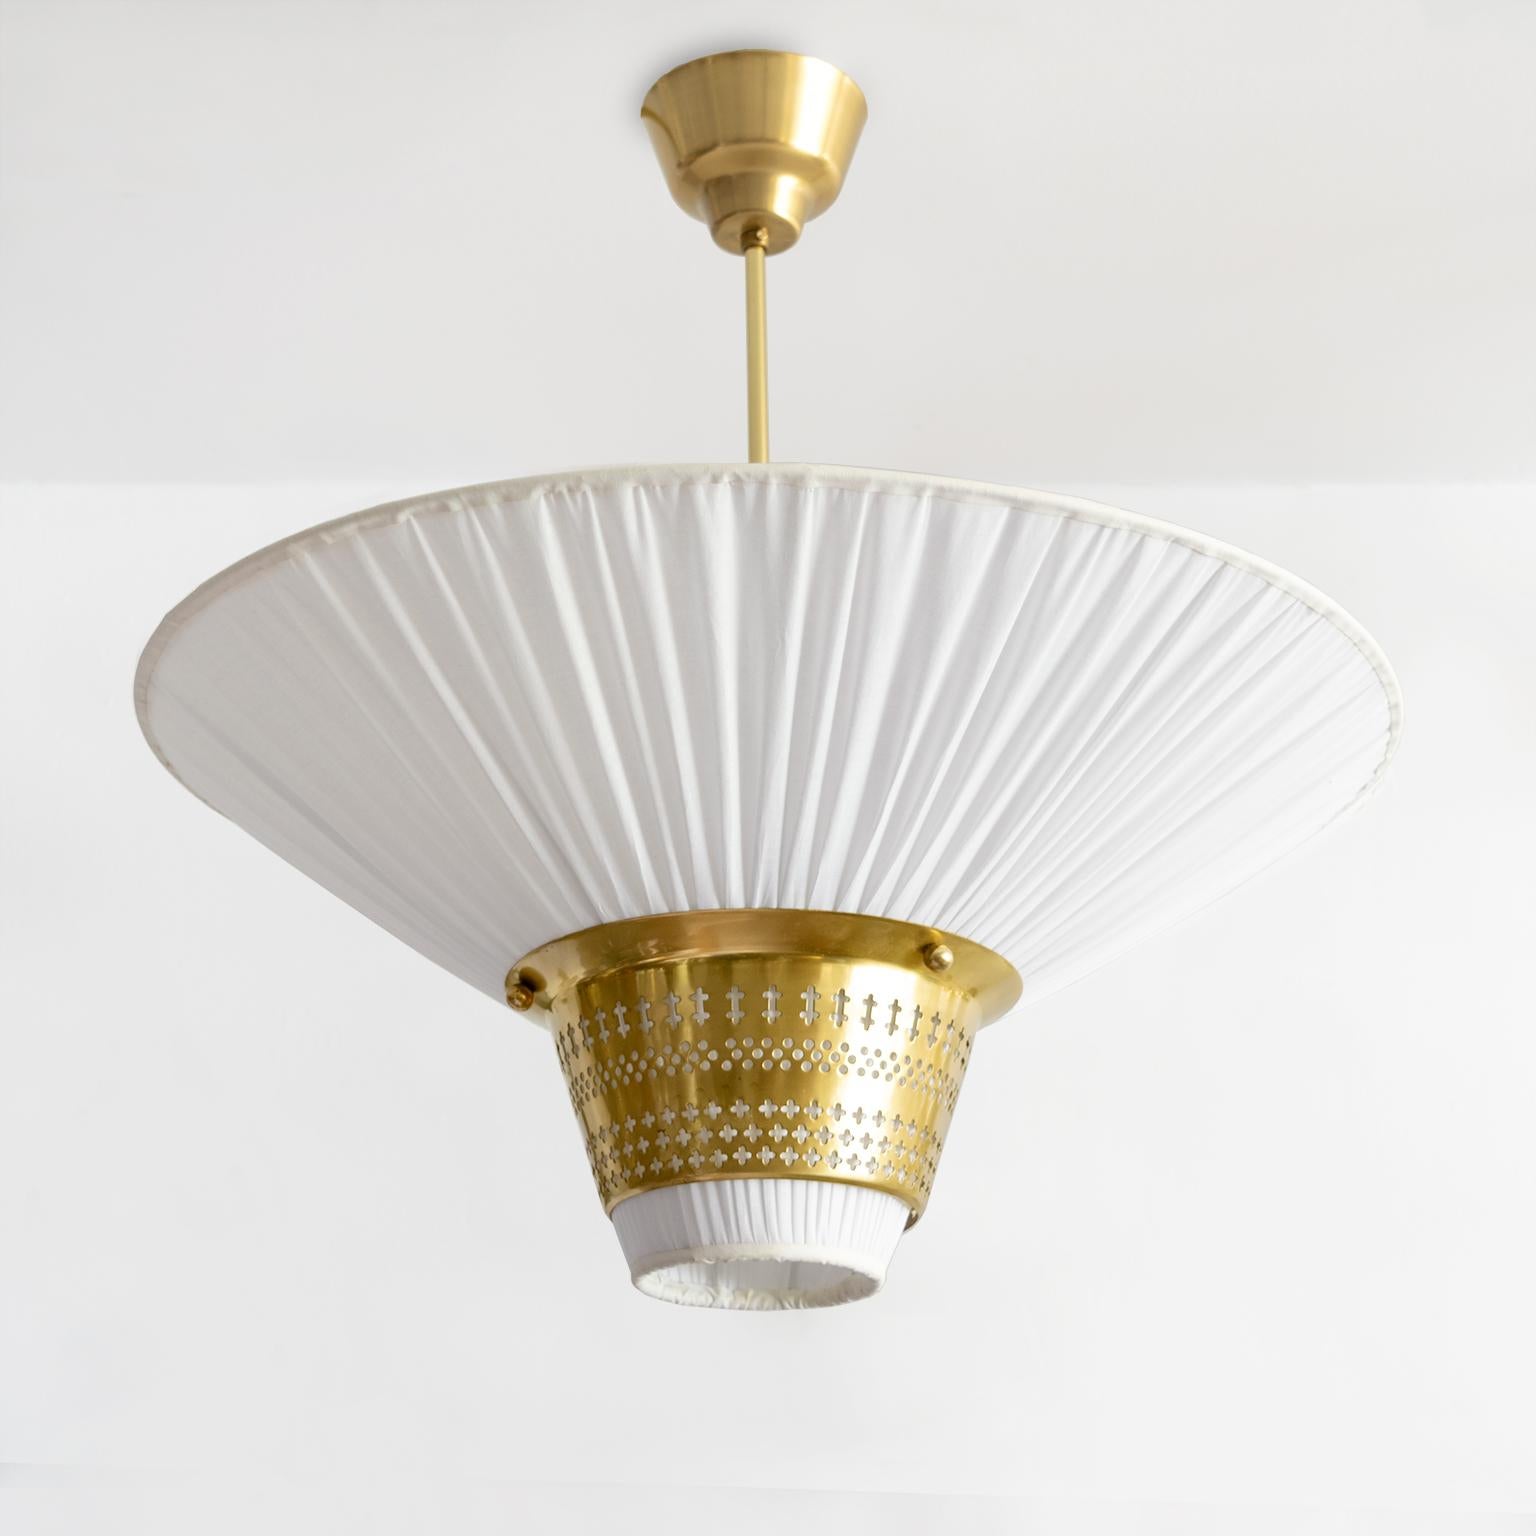 Hans Bergstrom designed for Ateljé Lyktan AB funnel form pendant with pleated cotton cover (newly redone) and a pierced brass 